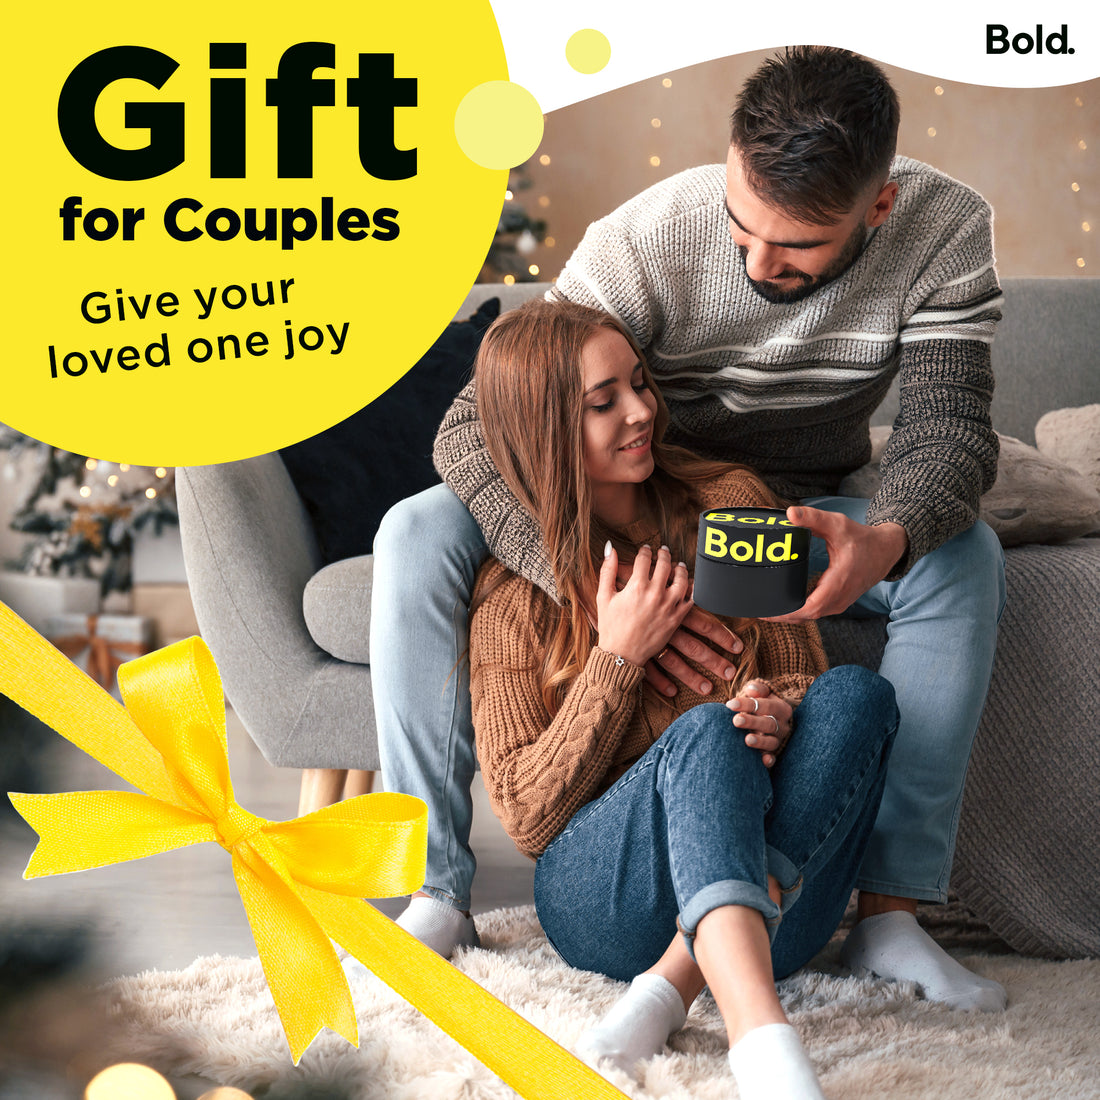 Valentine's Day Date Night Made Extra Special with Bold Cards: The Ultimate Conversation Game for Couples